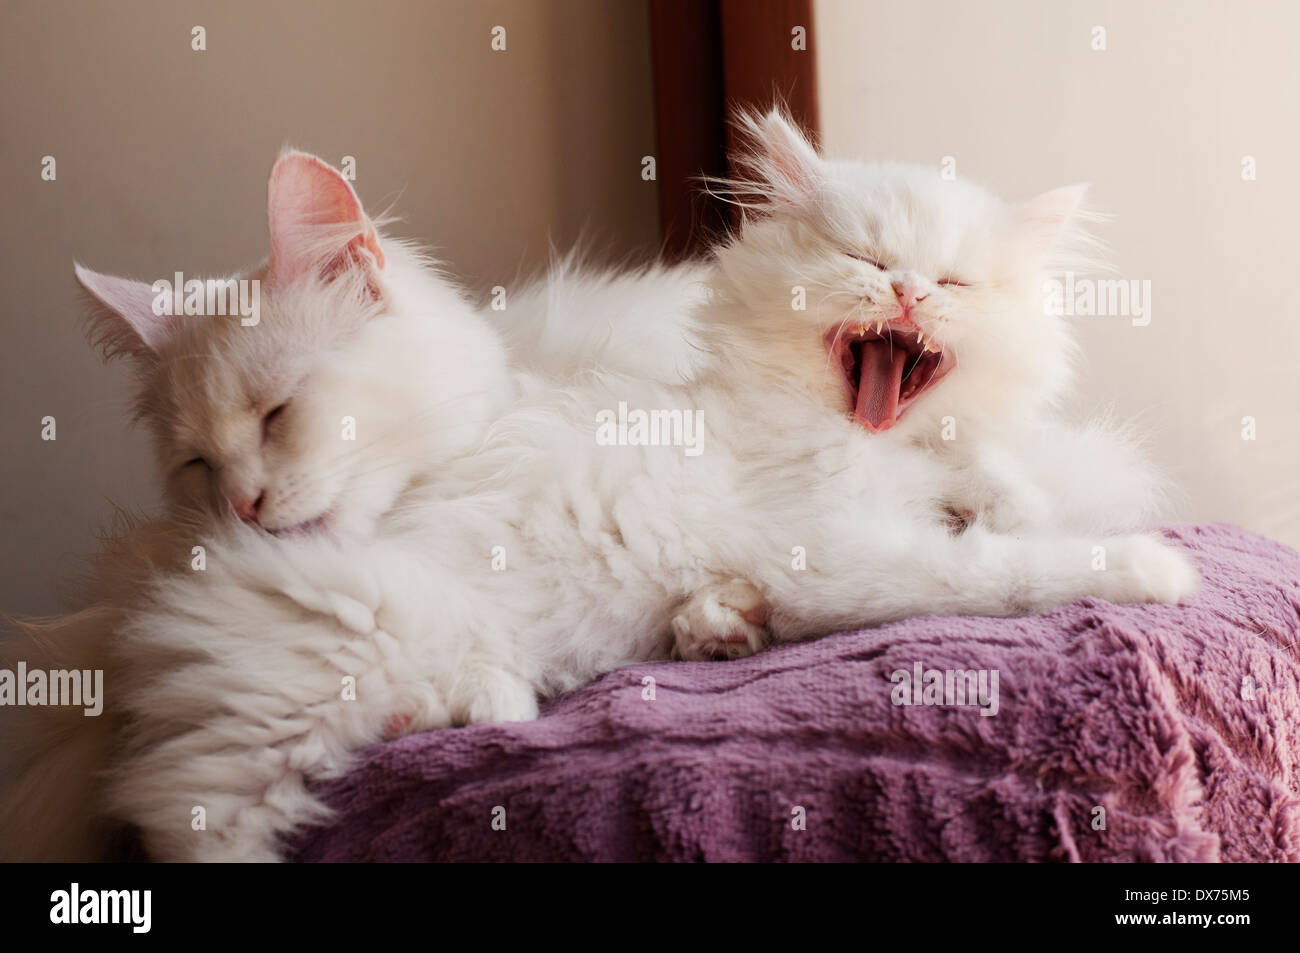 Two cats Stock Photo